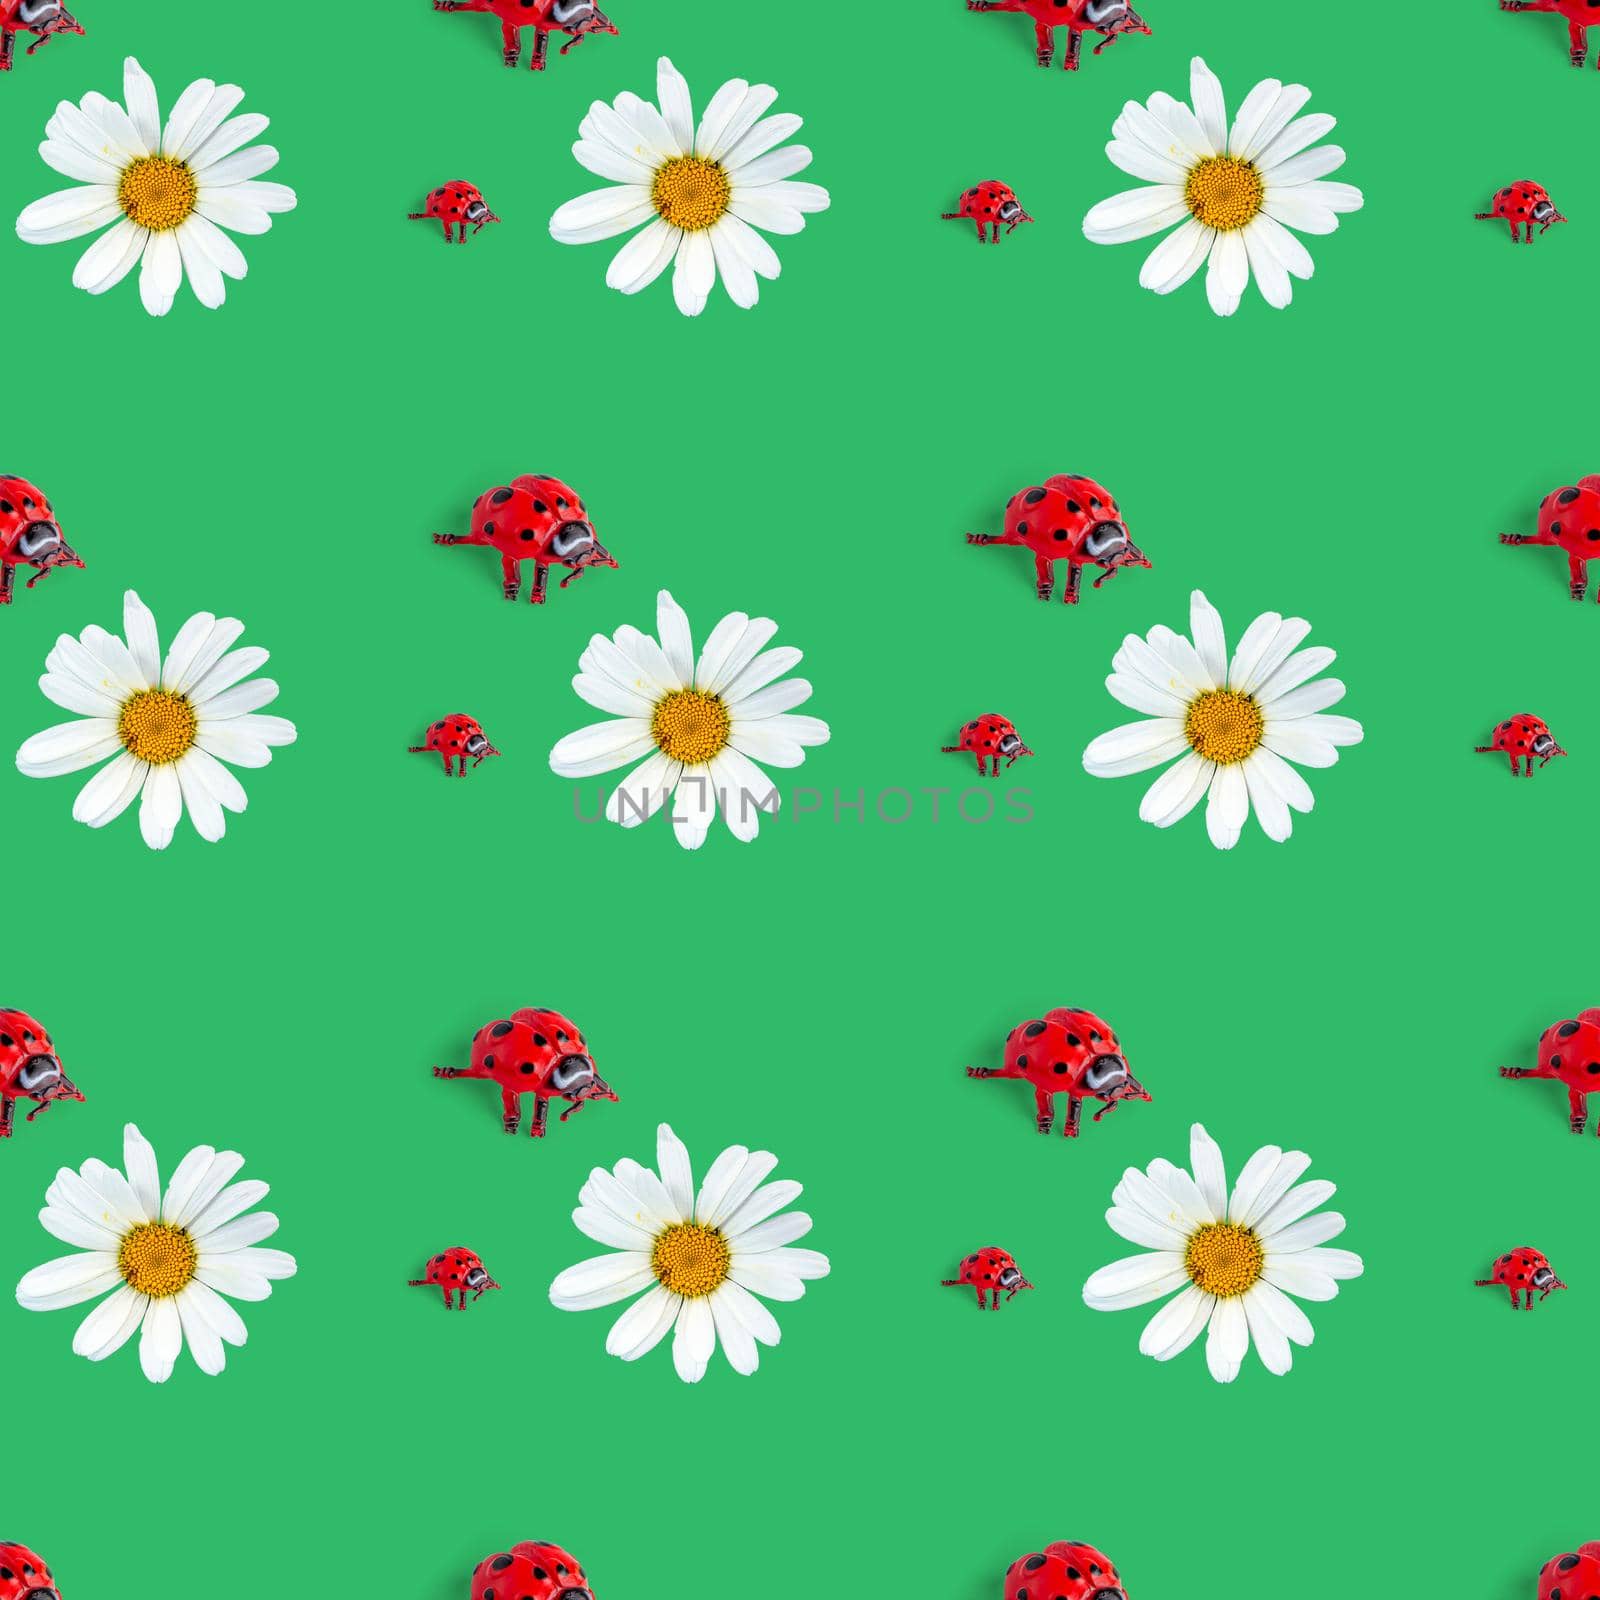 Seamless pattern of ladybug and chamomile flower on green background